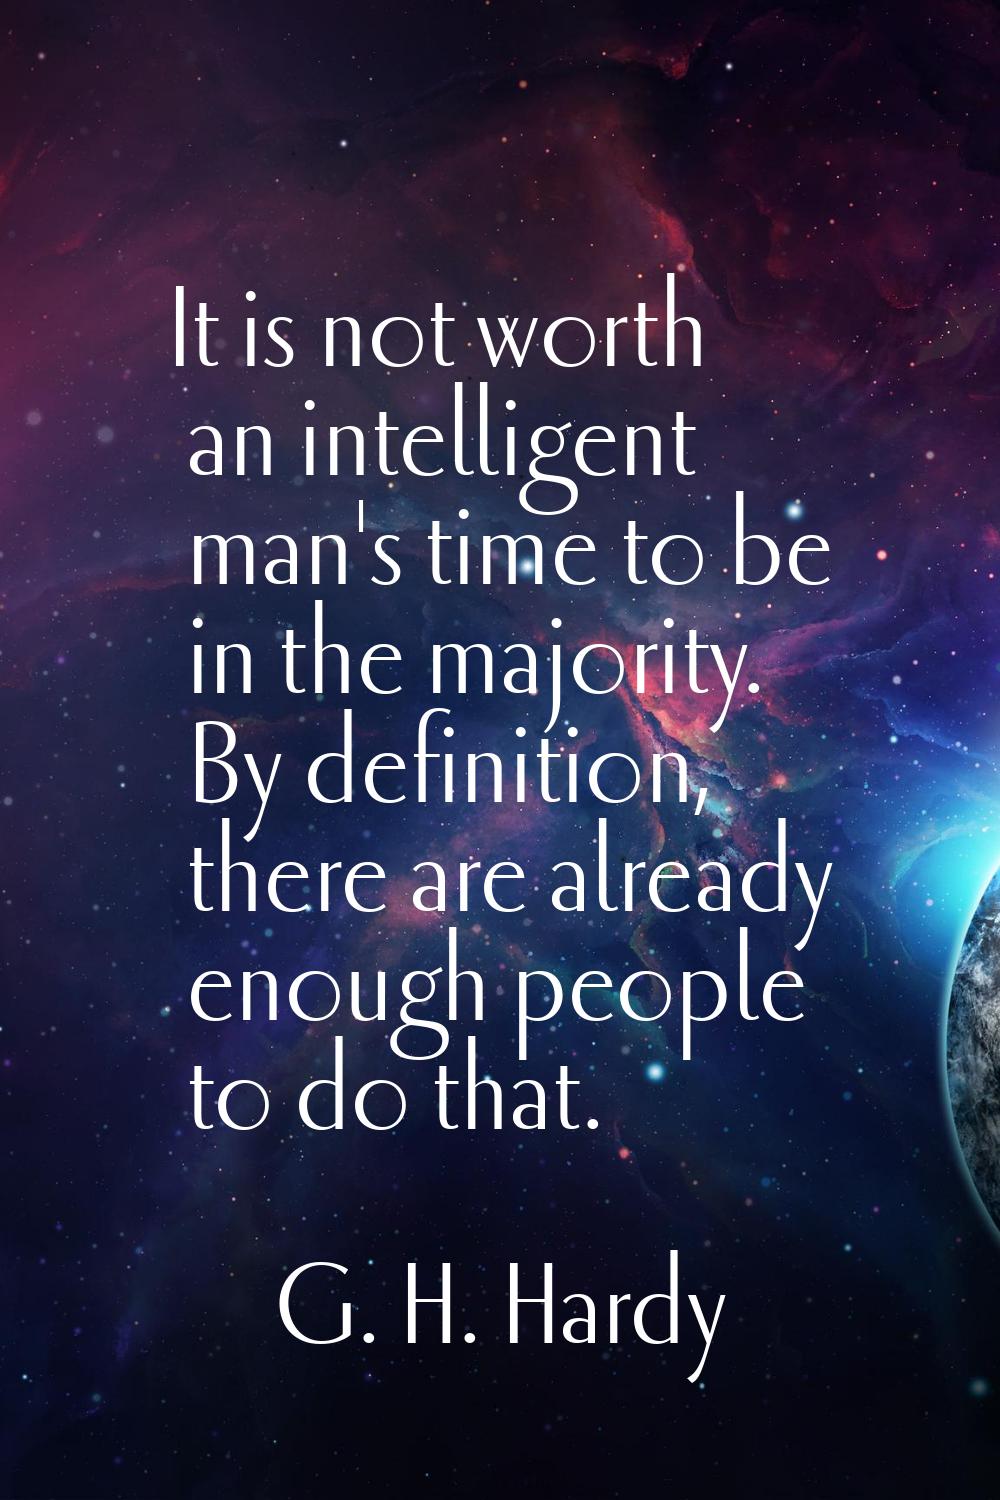 It is not worth an intelligent man's time to be in the majority. By definition, there are already e